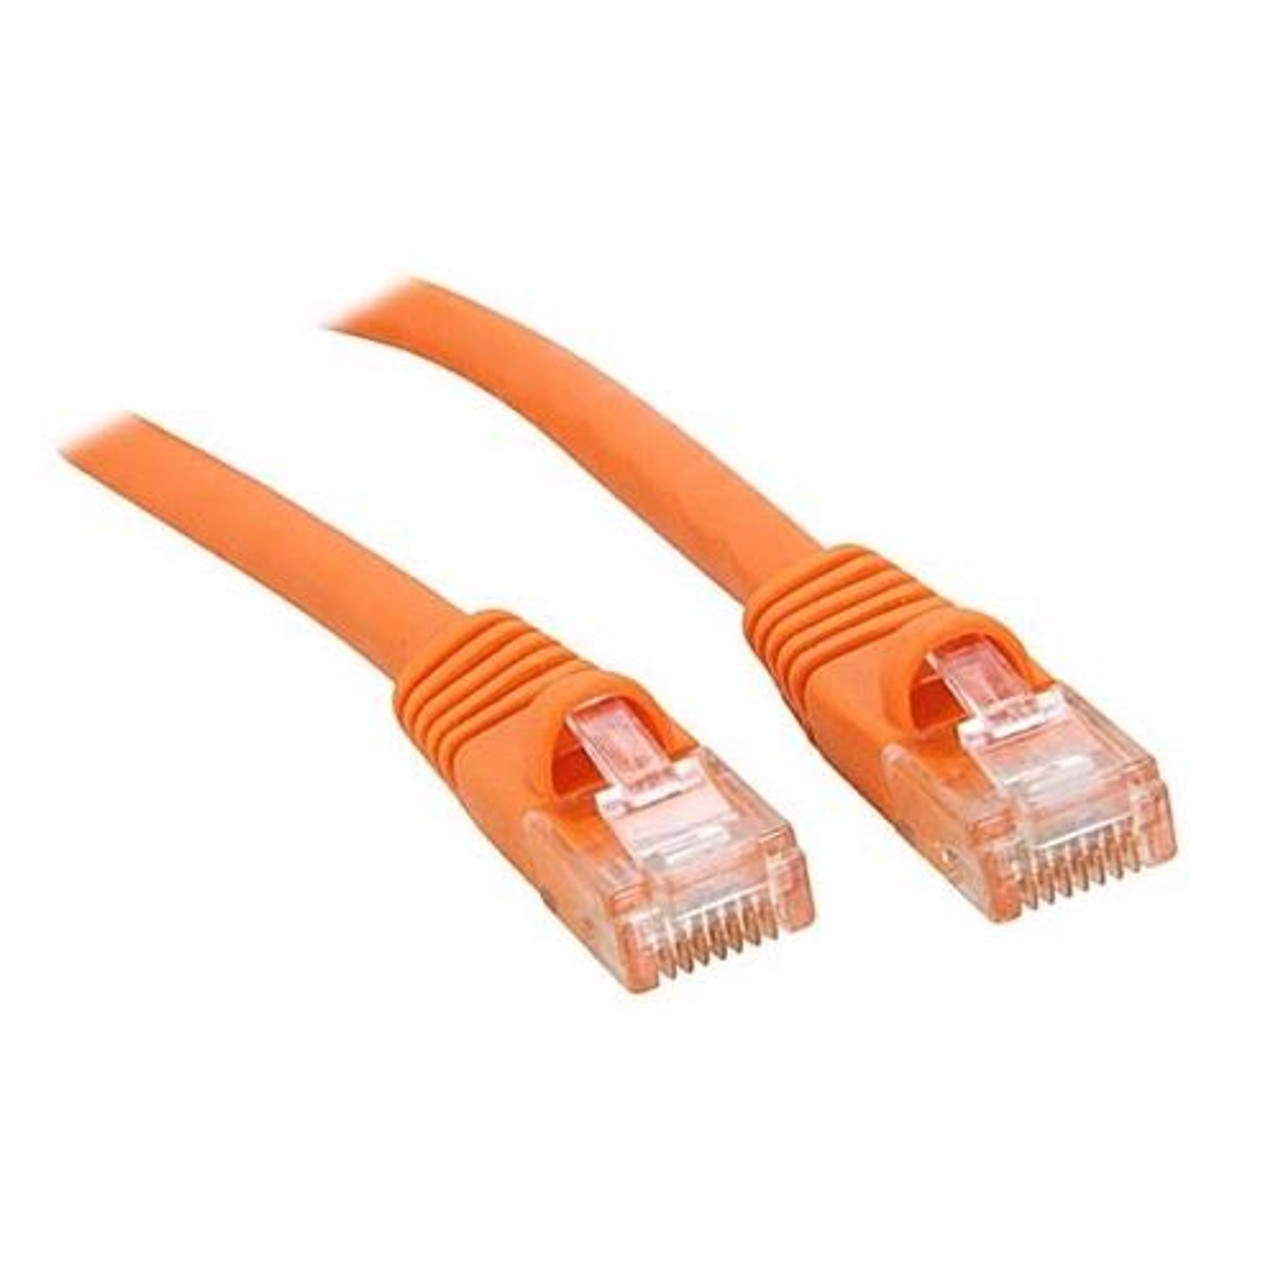 Eagle 3' FT CAT6 Patch Cord Cable Orange 24 AWG Stranded Copper UTP Snagless RJ45 Gold Flush Molded Booted 550 MHz RJ-45 Network Male to Male, Part # 308903-OR